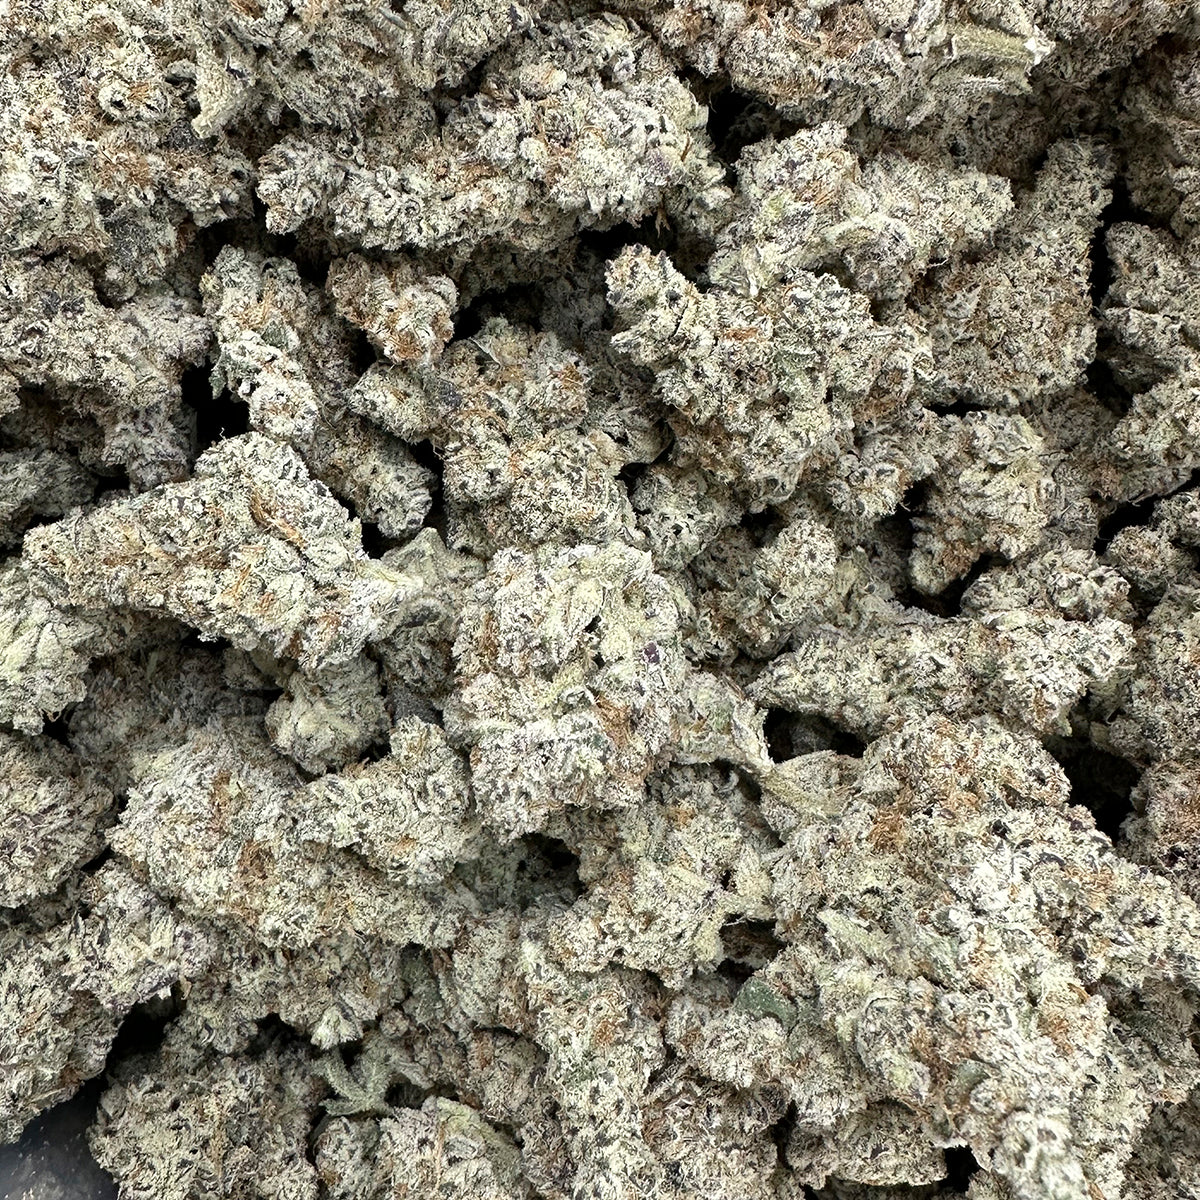 Dante's Inferno Premium THCa Hybrid Hemp Flower - A surprisingly fruity and sweet hybrid with frosted nugs and orange pistils throughout. This variety has a delicious smell and great flavor to finish it off. Available in 3.5g and 14g size jars.